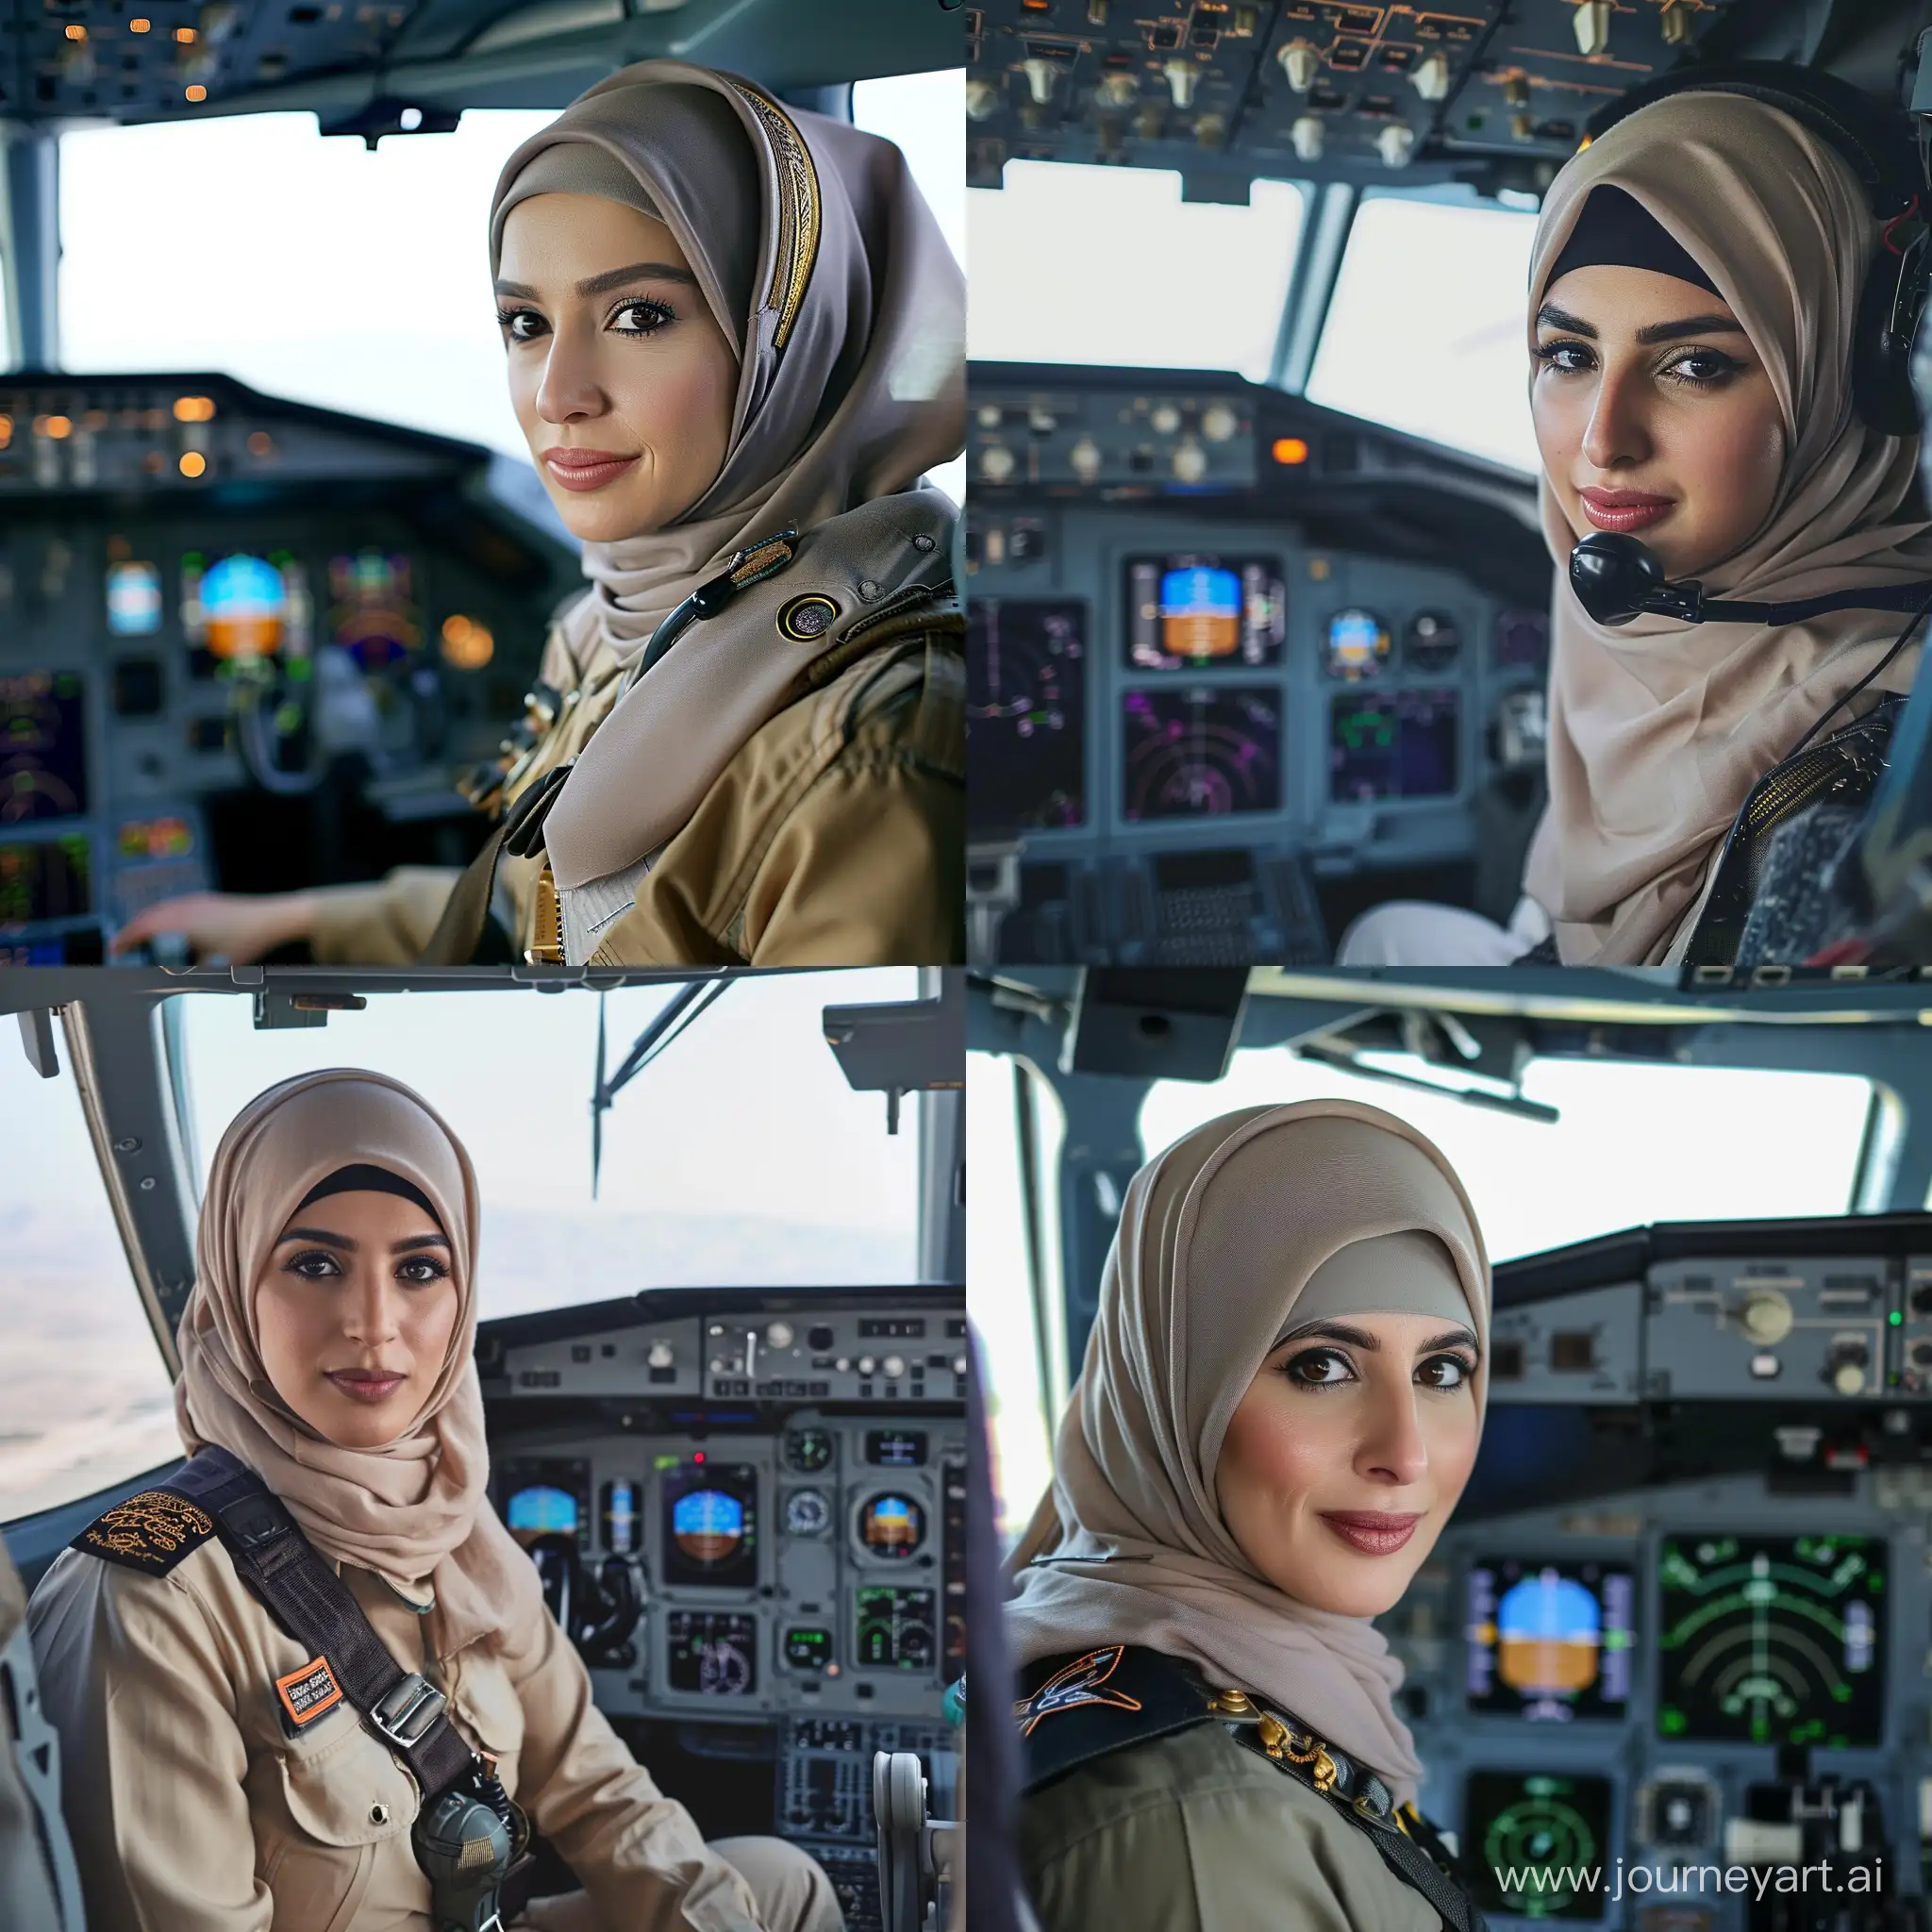 Muslim-Woman-Pilot-in-the-Cockpit-of-a-Modern-Airplane